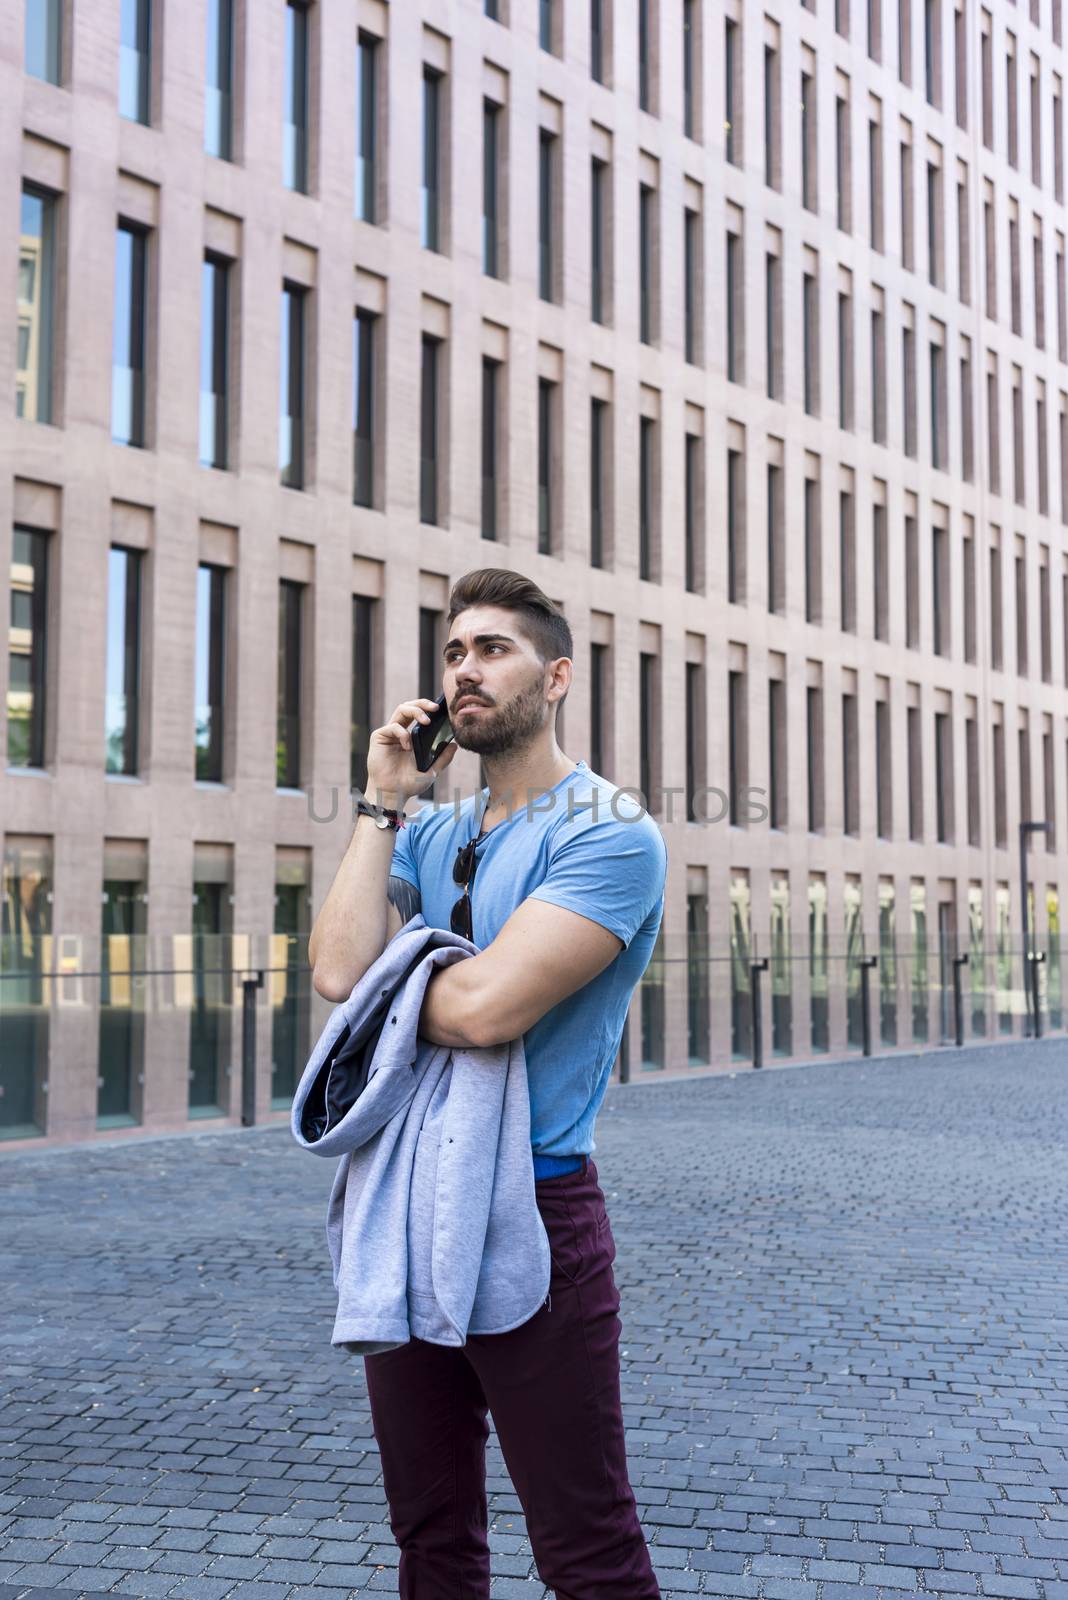 Young businessman talking on his phone outdoors by raferto1973